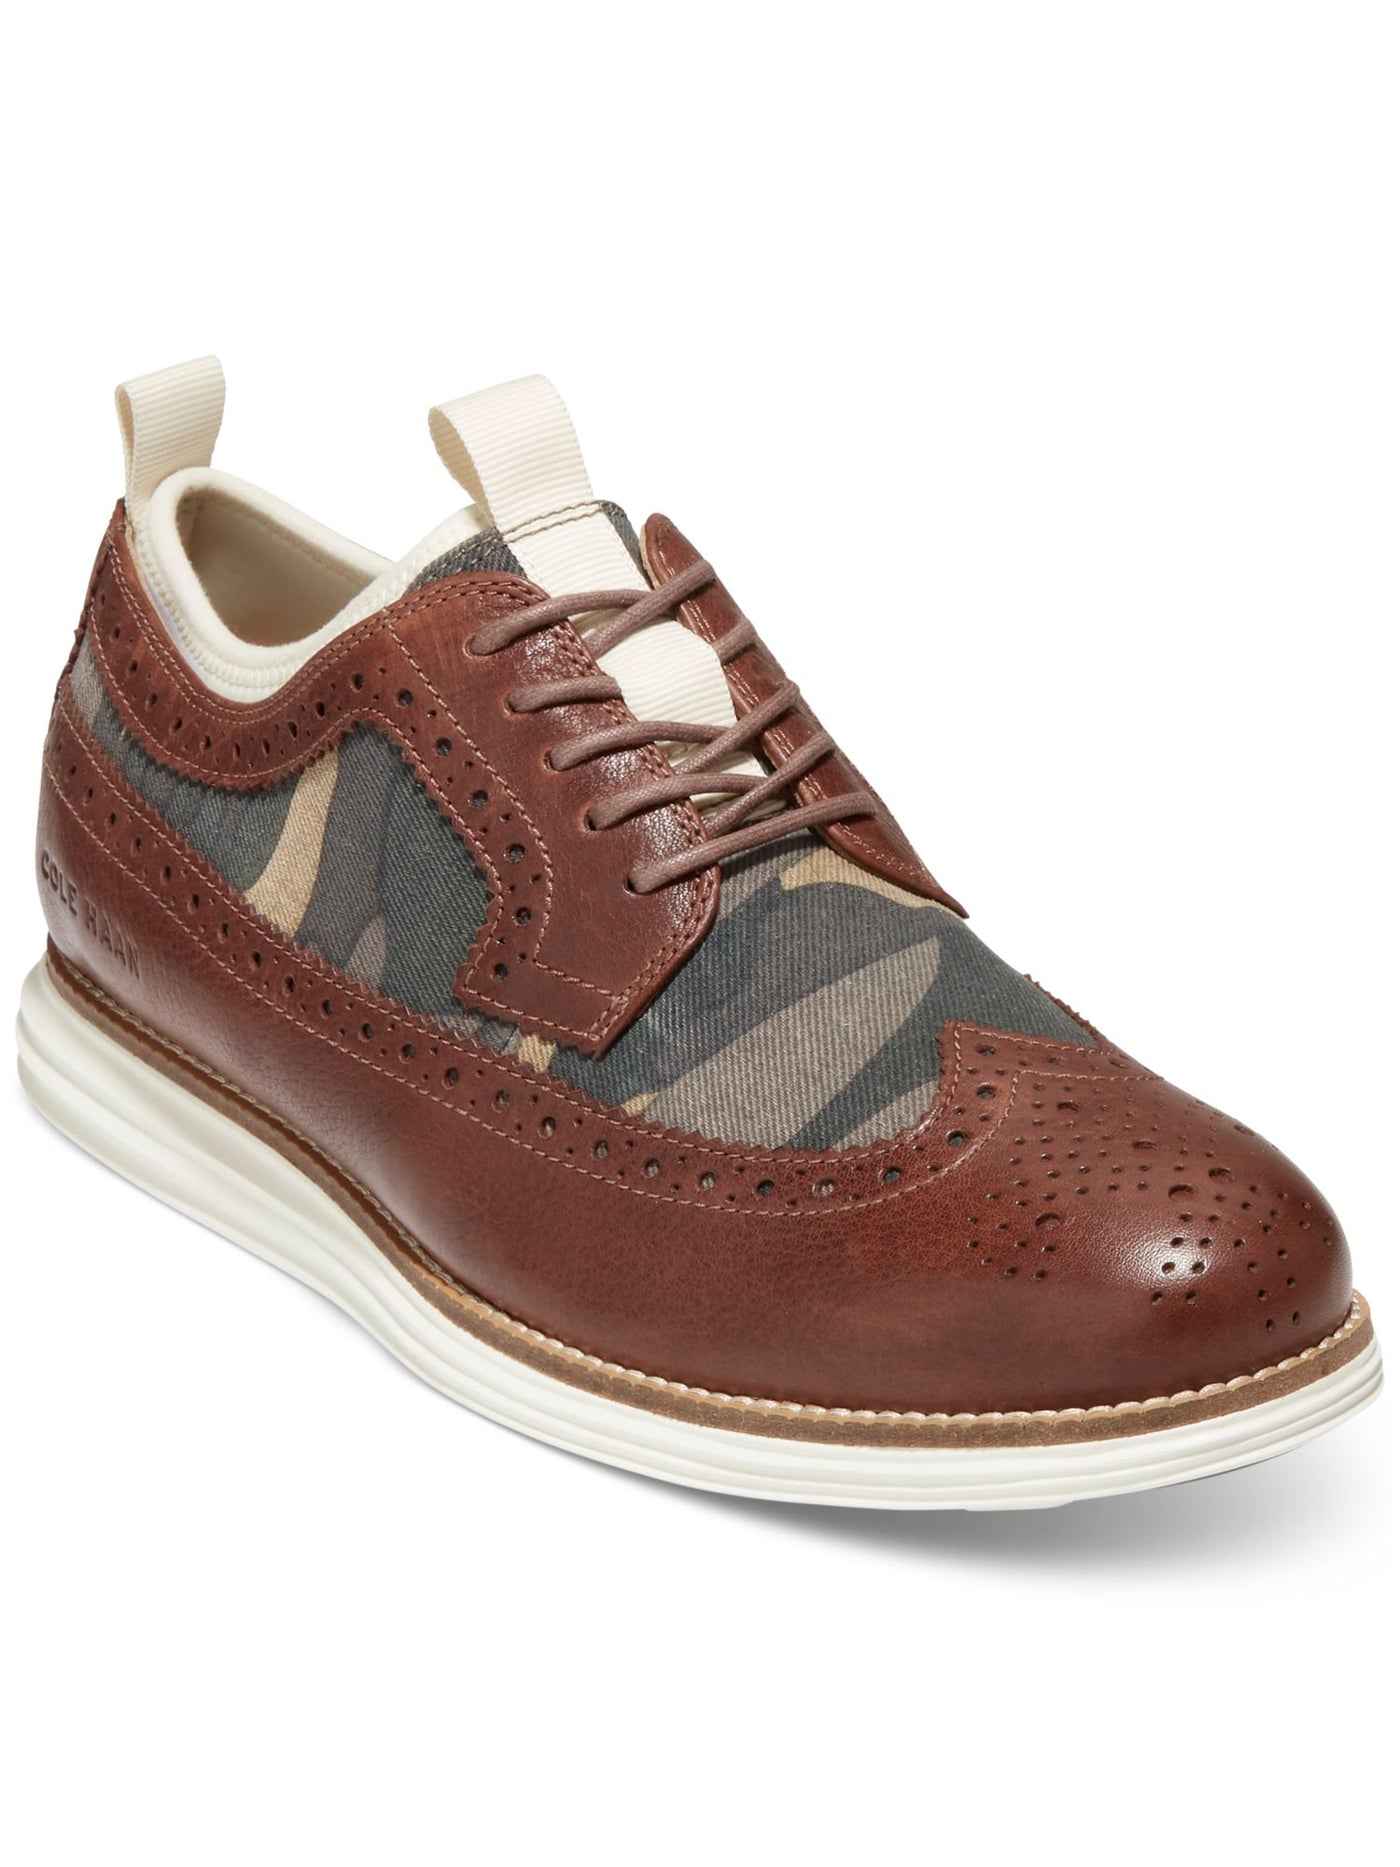 COLE HAAN Mens Brown Mixed Media Internal Neoprene Lining Dual Pull-Tabs Cushioned Longwing Wingtip Toe Wedge Lace-Up Leather Oxford Shoes 7.5 M